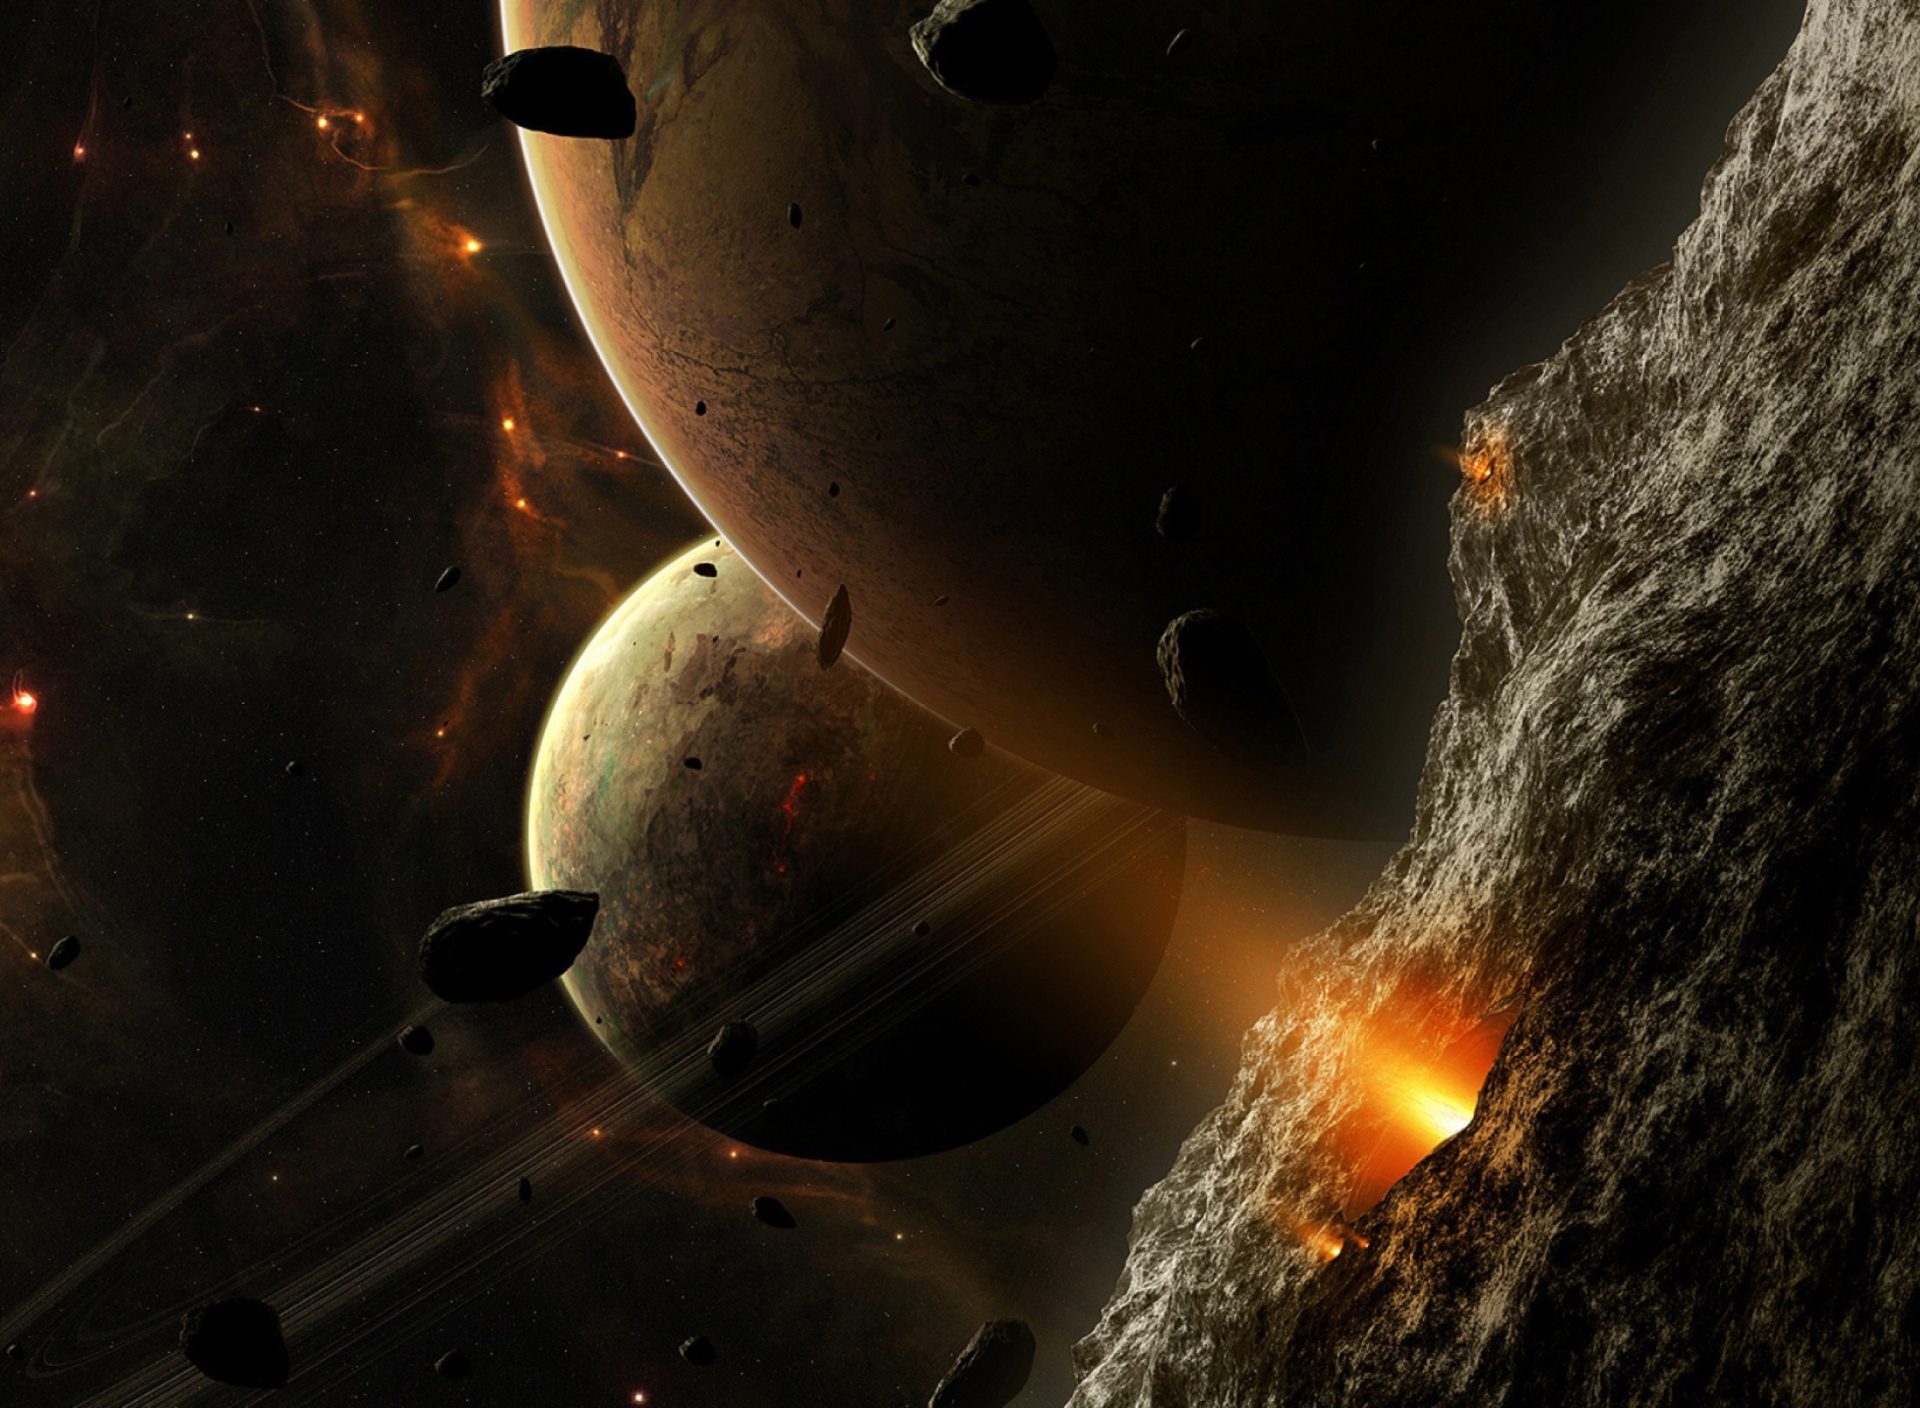 Asteroids And Planets wallpaper 1920x1408